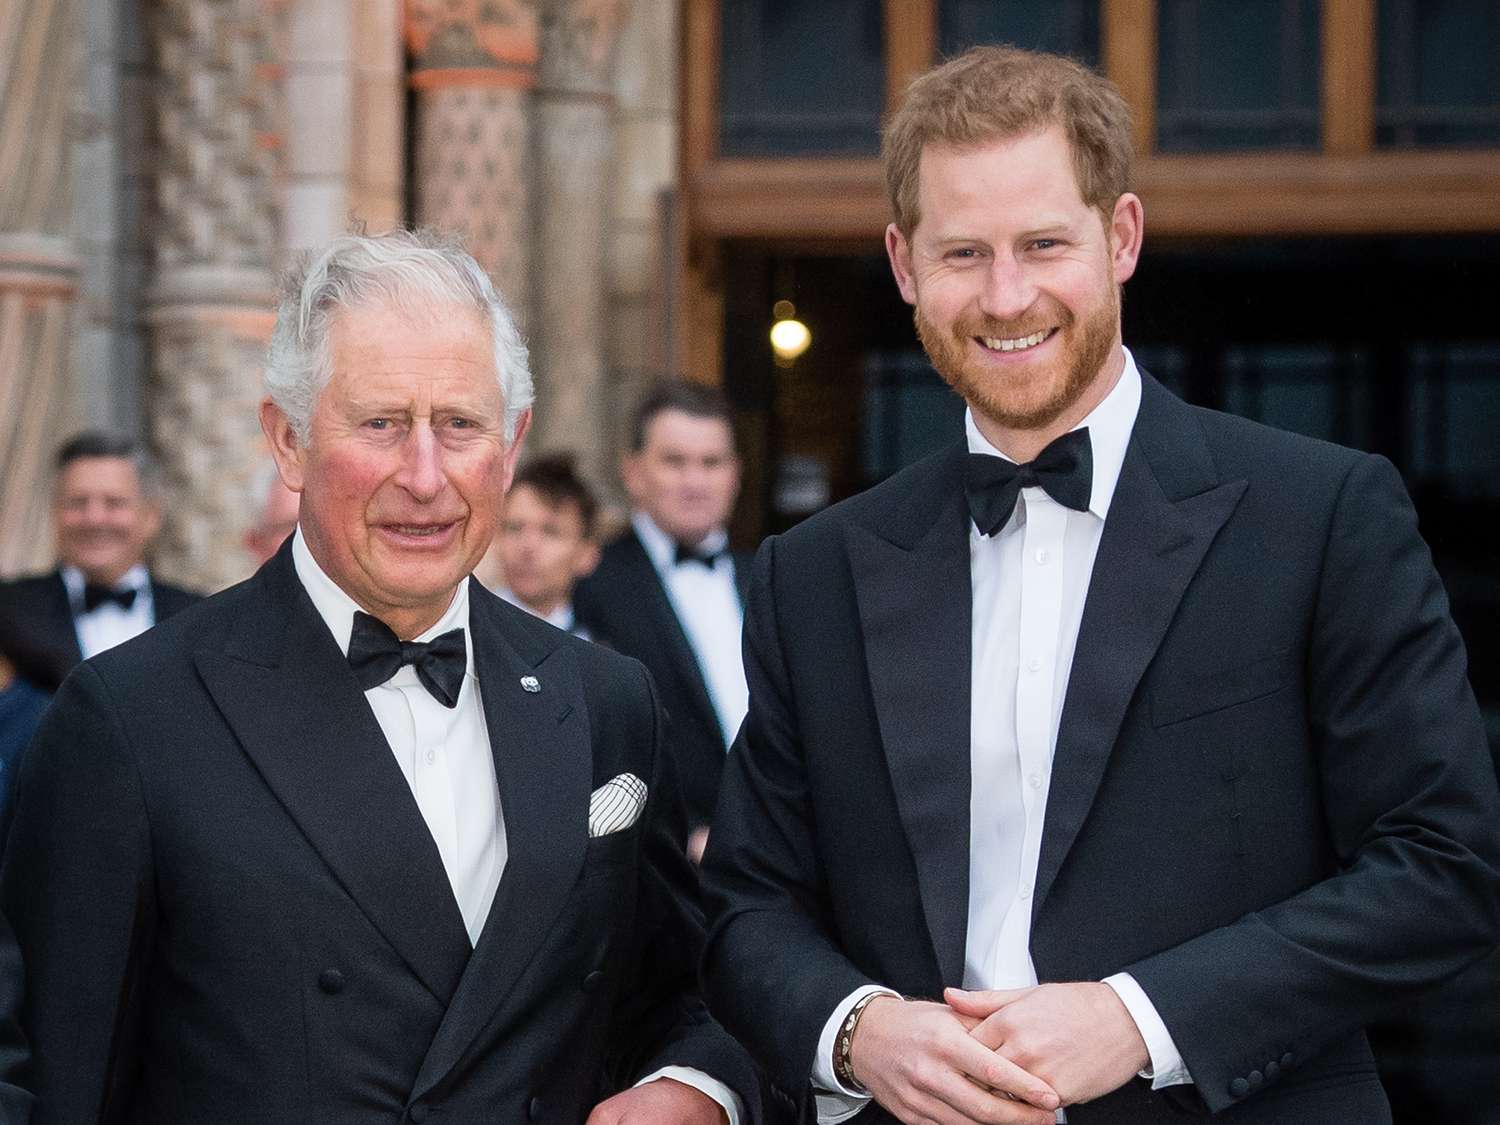 The Duke of Sussex and King Charles